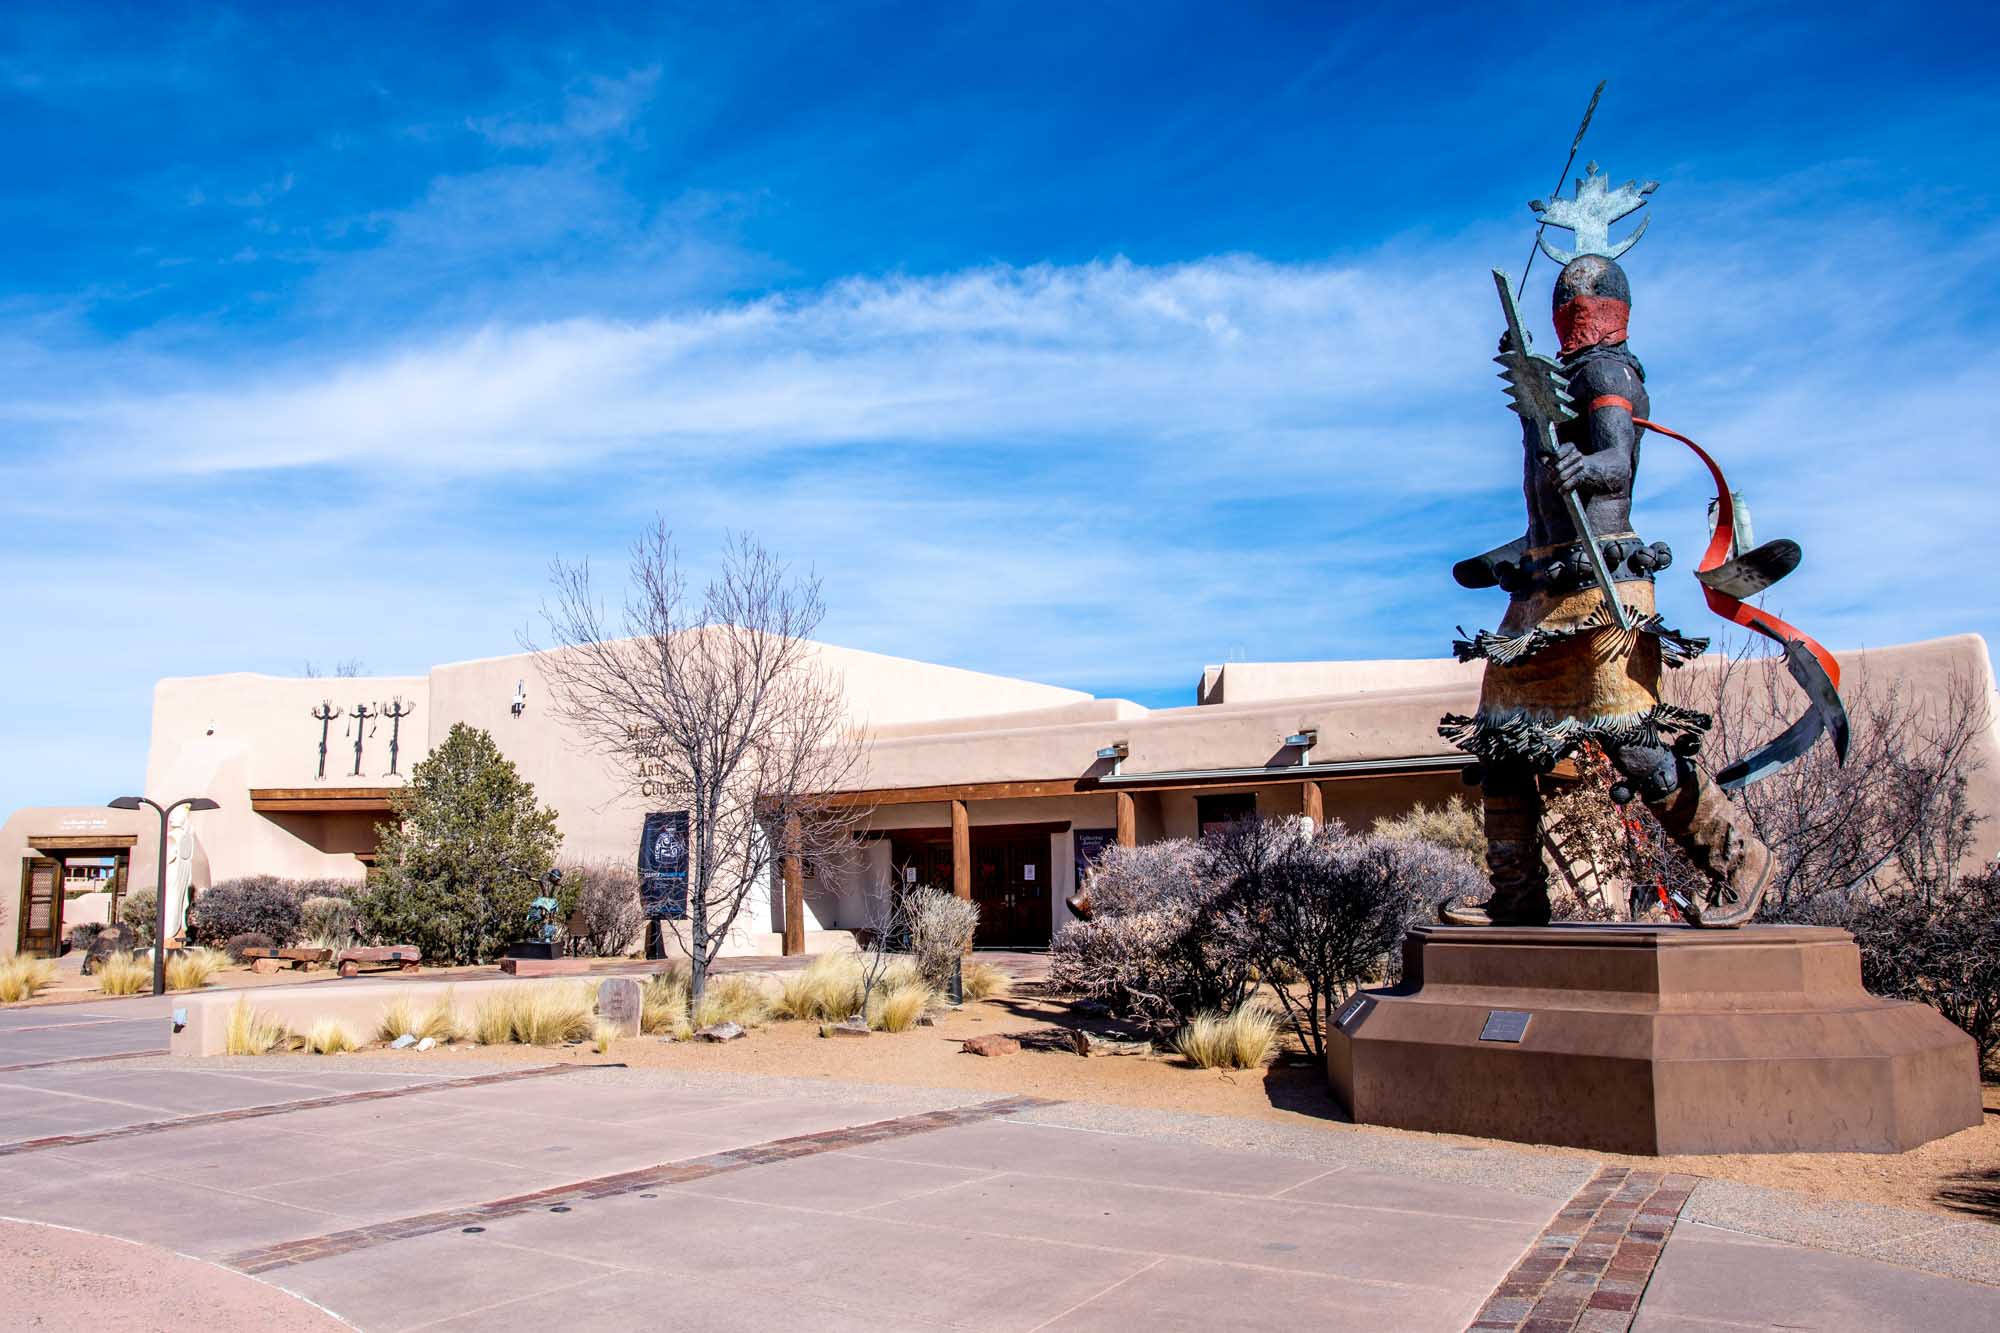 Statue of a Native American dancer outside a museum with an adobe facade in Santa Fe.